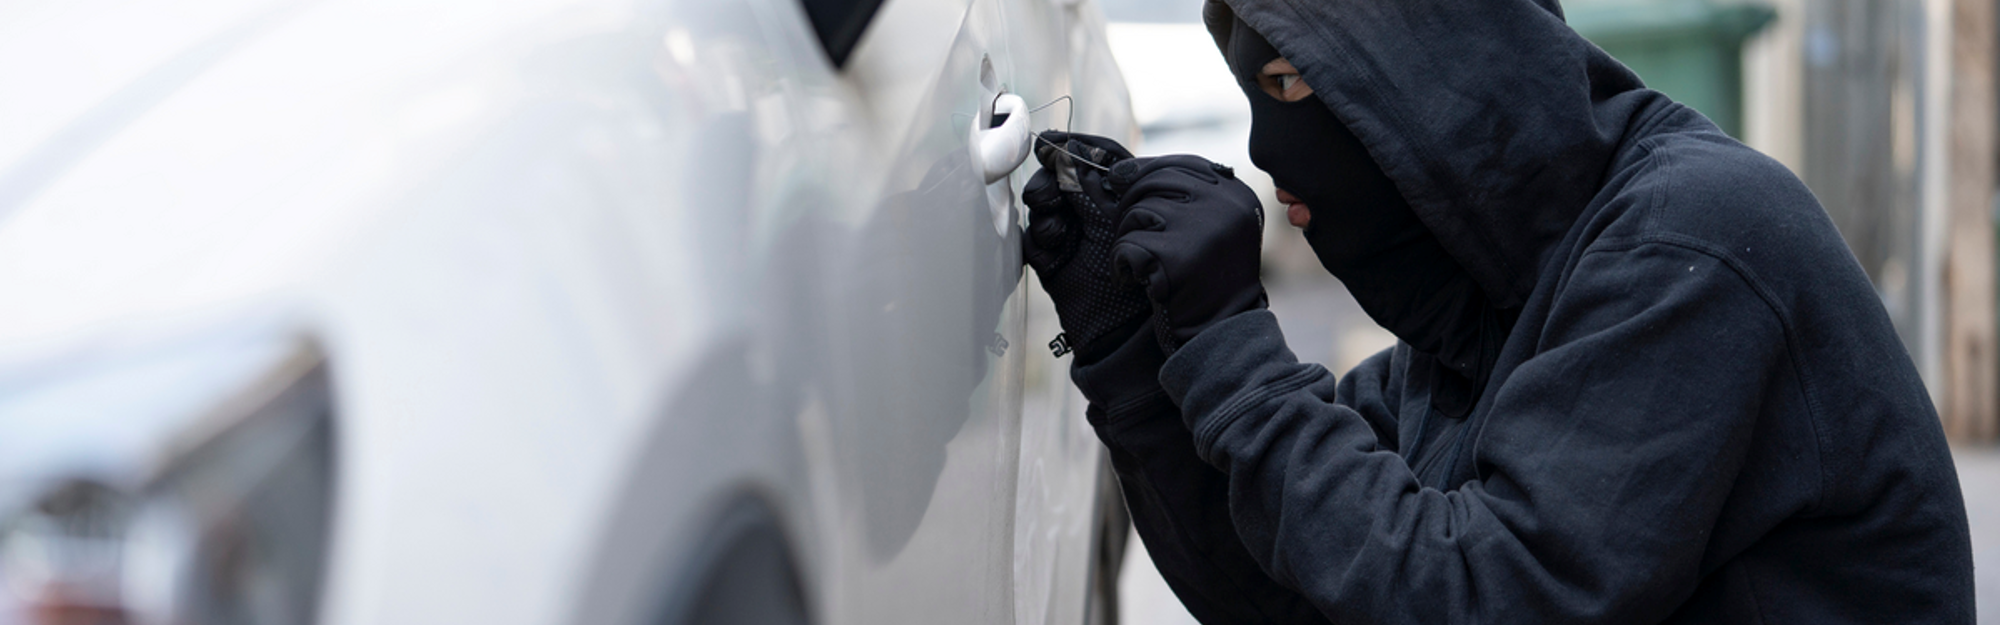 Thief dressed in black with a mask trying to steal a van.